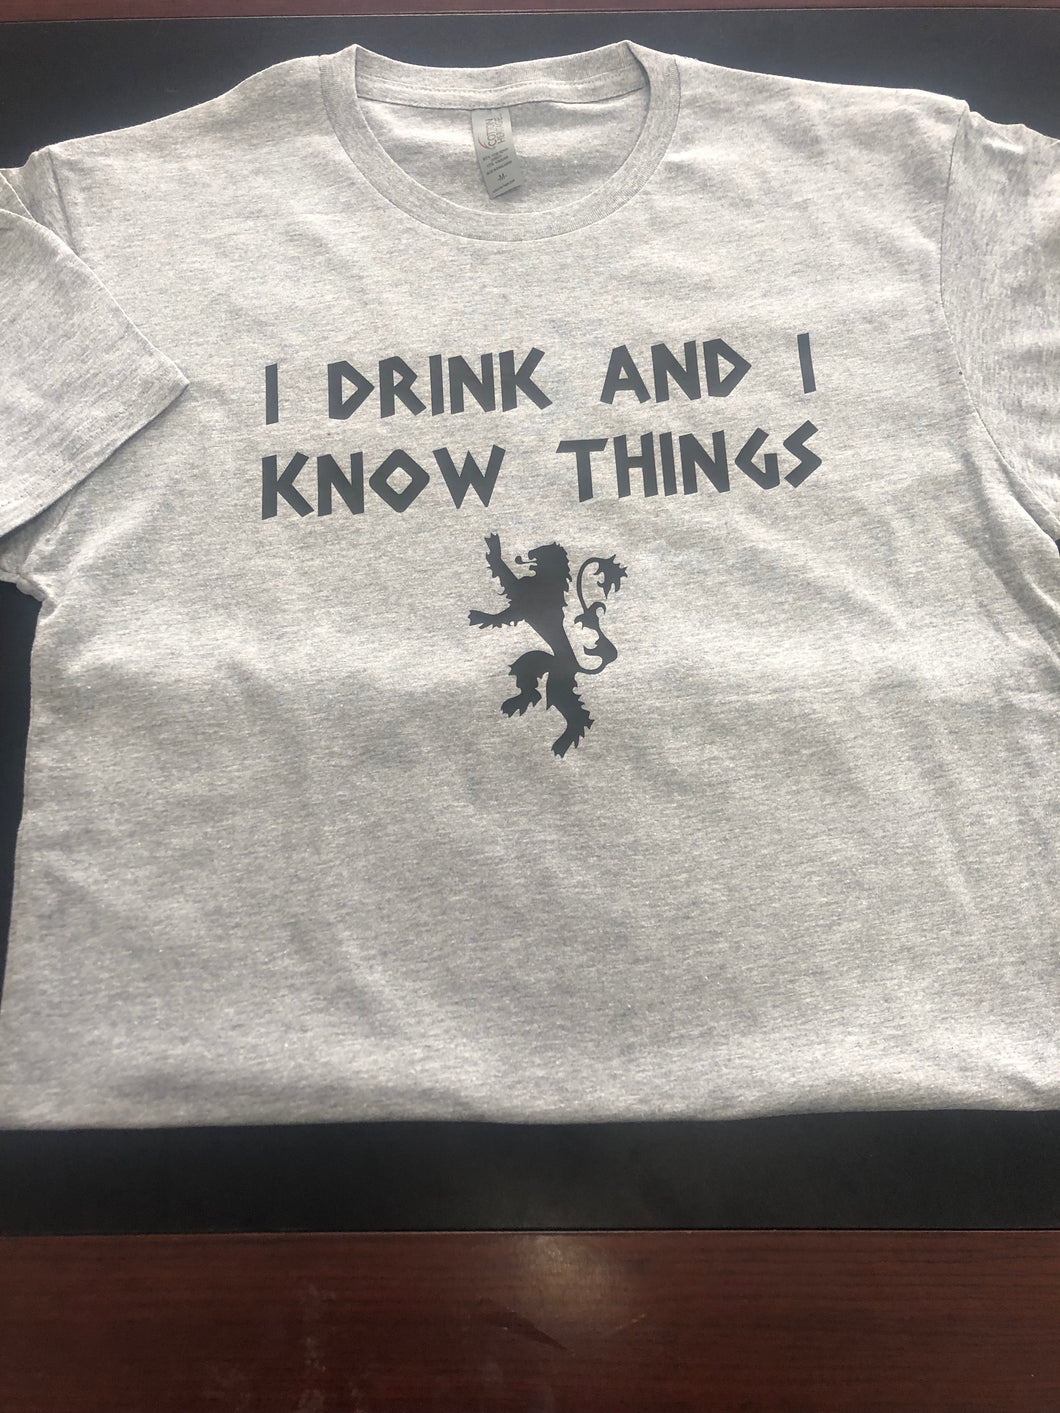 I Drink and I Know Things.. TShirt